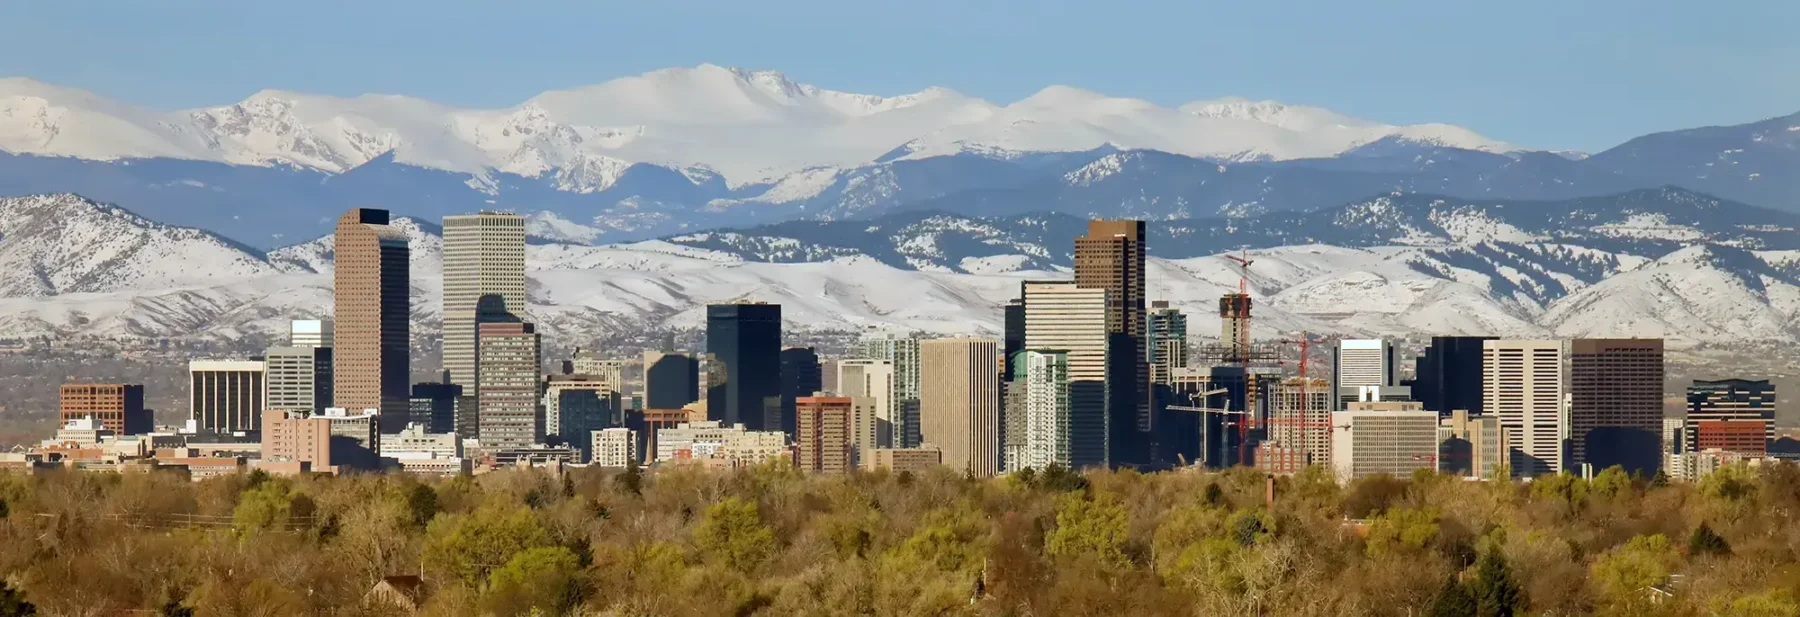 Denver Colorado skyline with mountains in the background